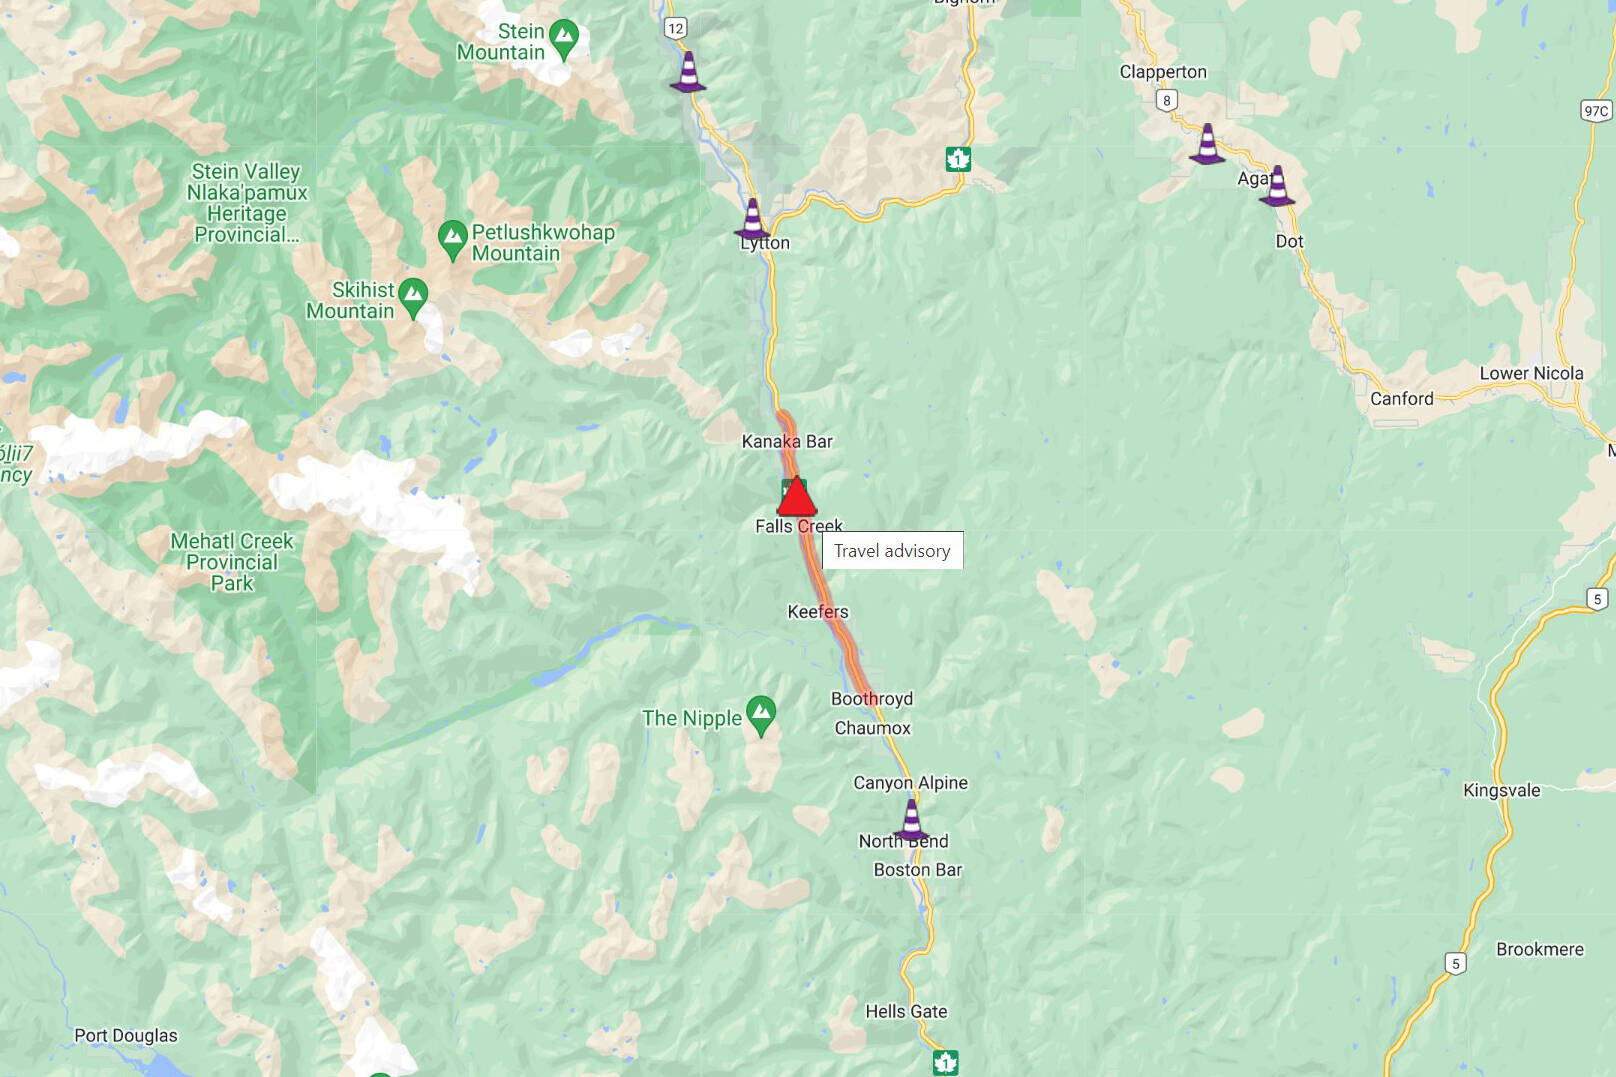 Due to the upcoming heavy rainfall, the Ministry of Transportation and Infrastructure is closing Highway 1 through the Fraser Canyon on Monday (Dec. 7) at 7 p.m. (DriveBC/X/Twitter)